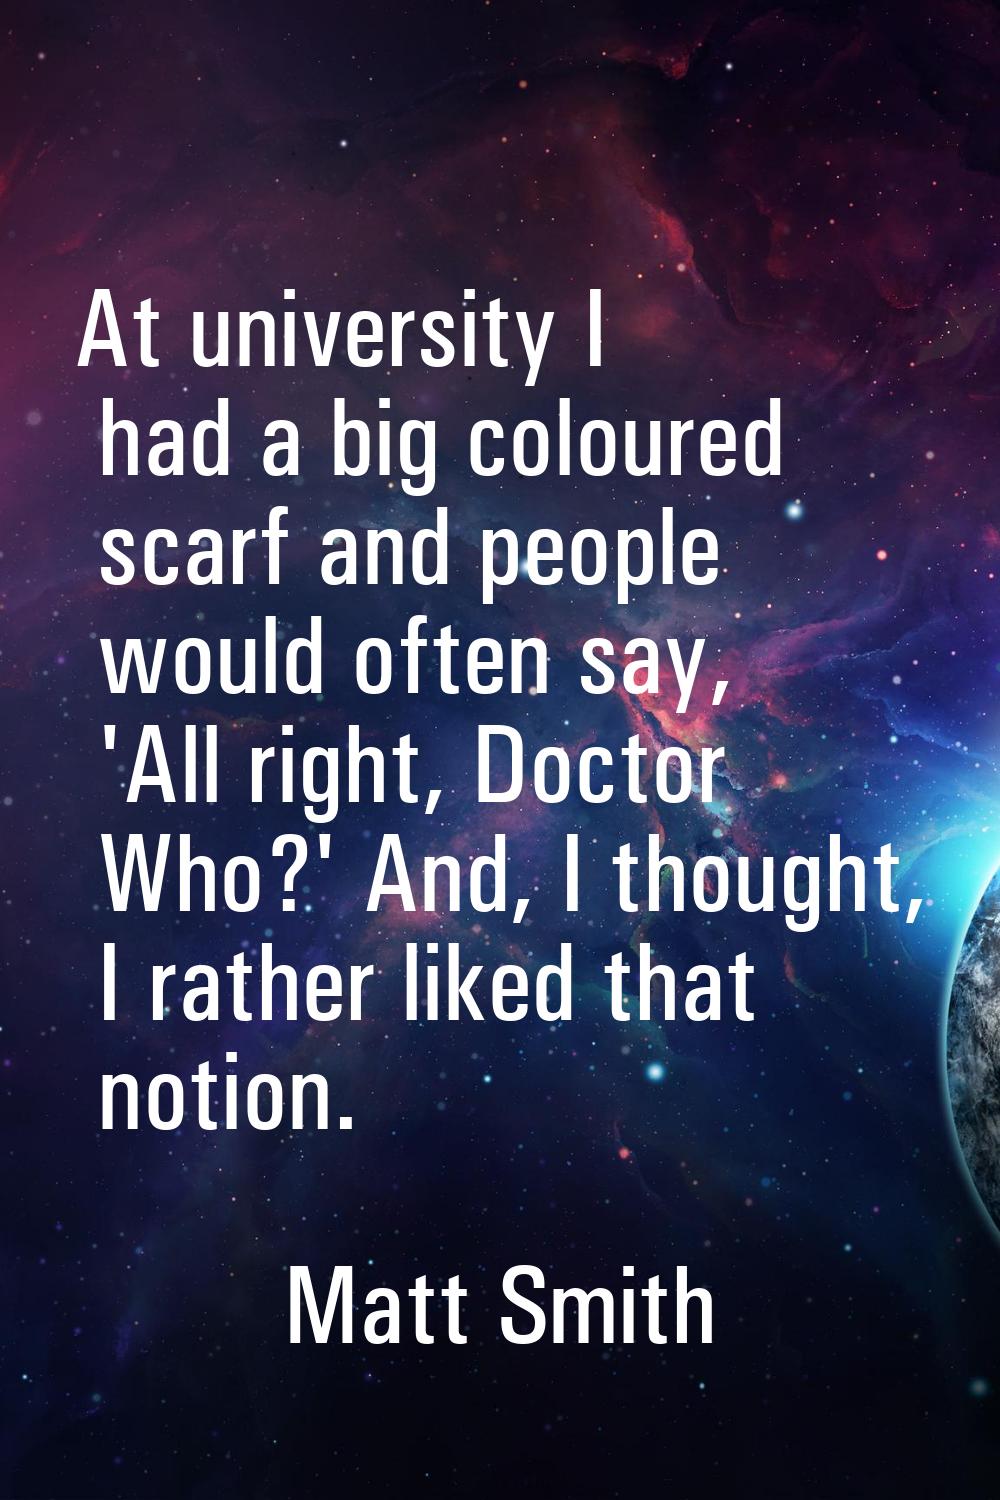 At university I had a big coloured scarf and people would often say, 'All right, Doctor Who?' And, 